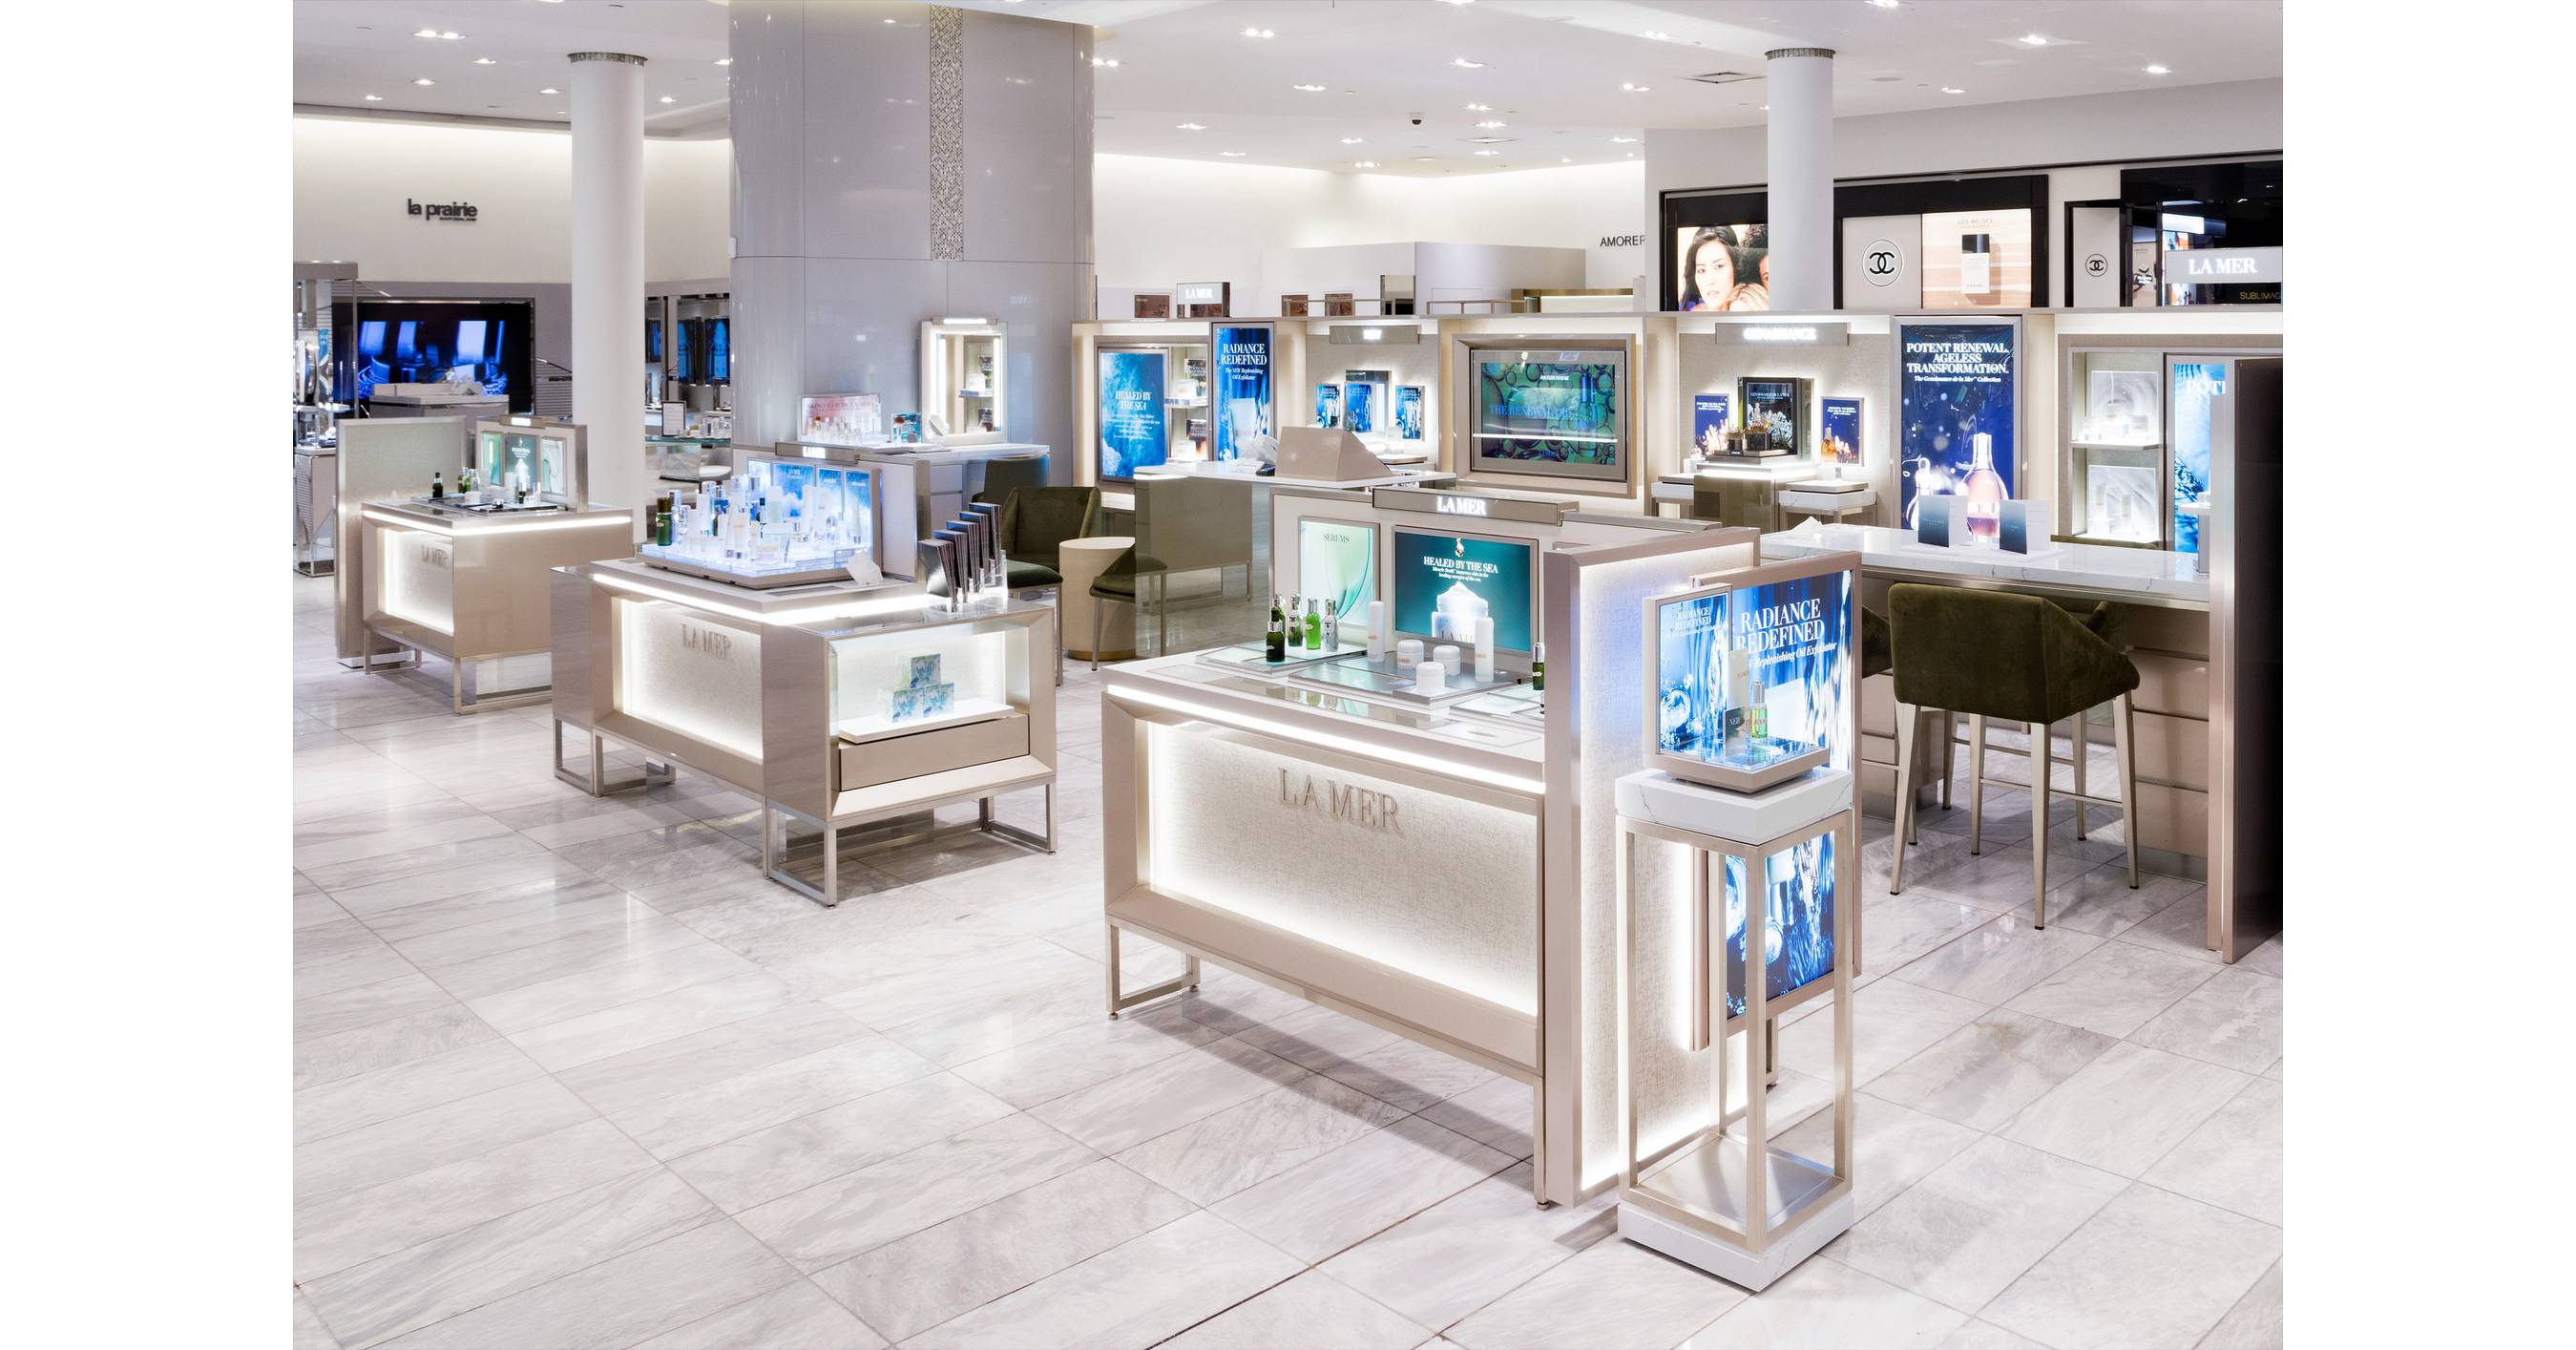 Holt Renfrew Closes Three Locations as it Embarks on $300 Million Expansion